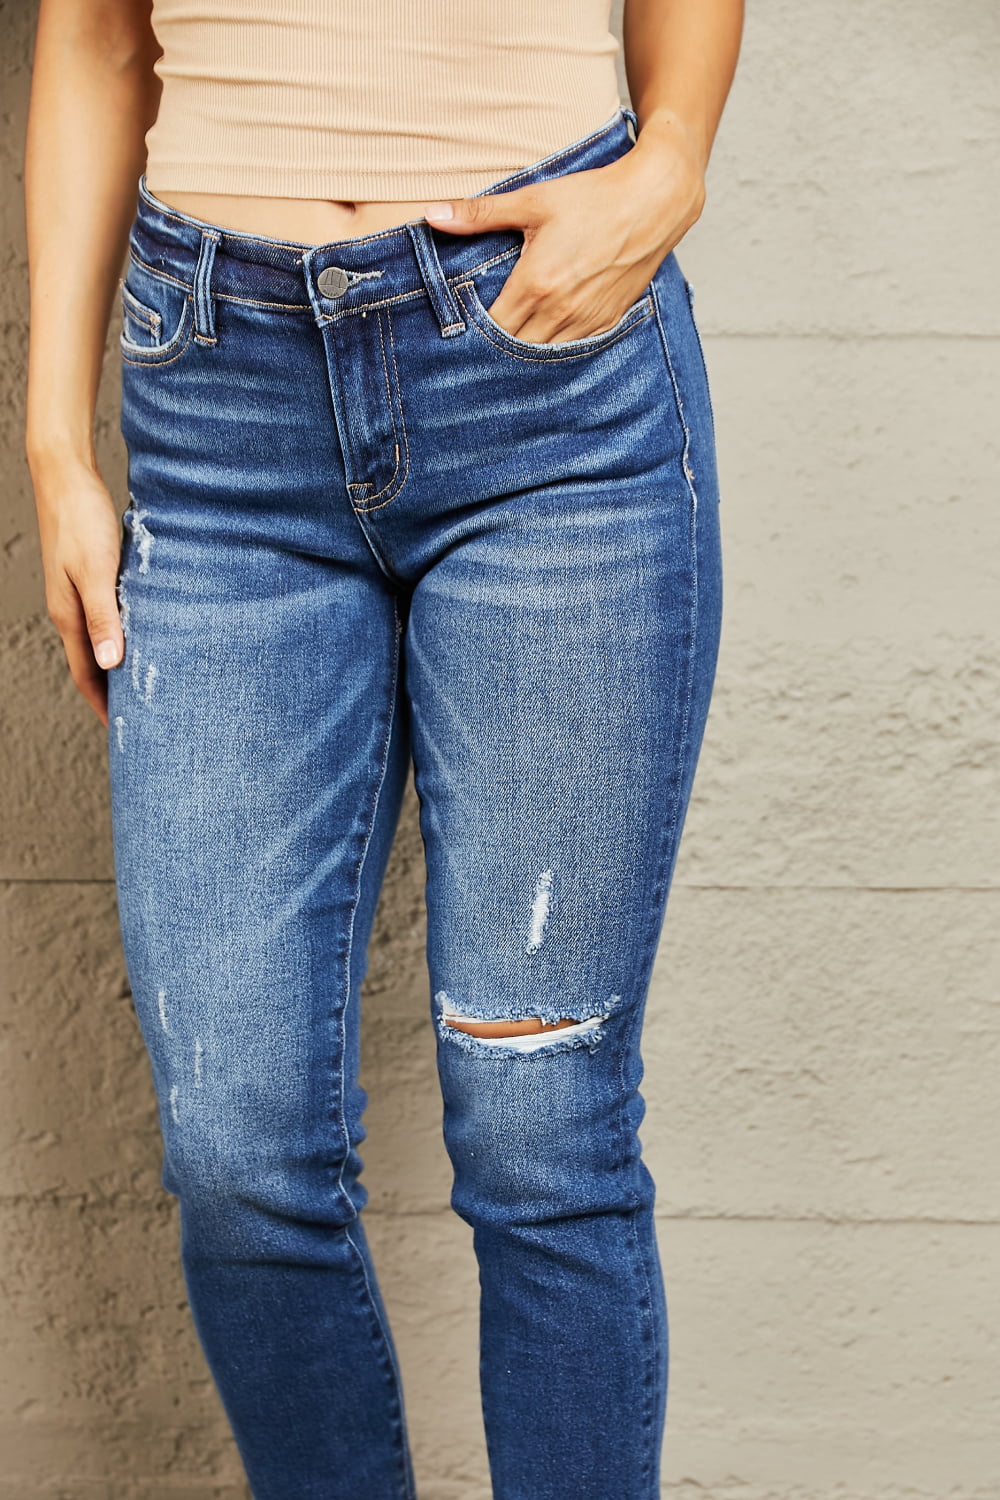 BAYEAS Mid Rise Distressed Slim Jeans - Jeans - FITGGINS